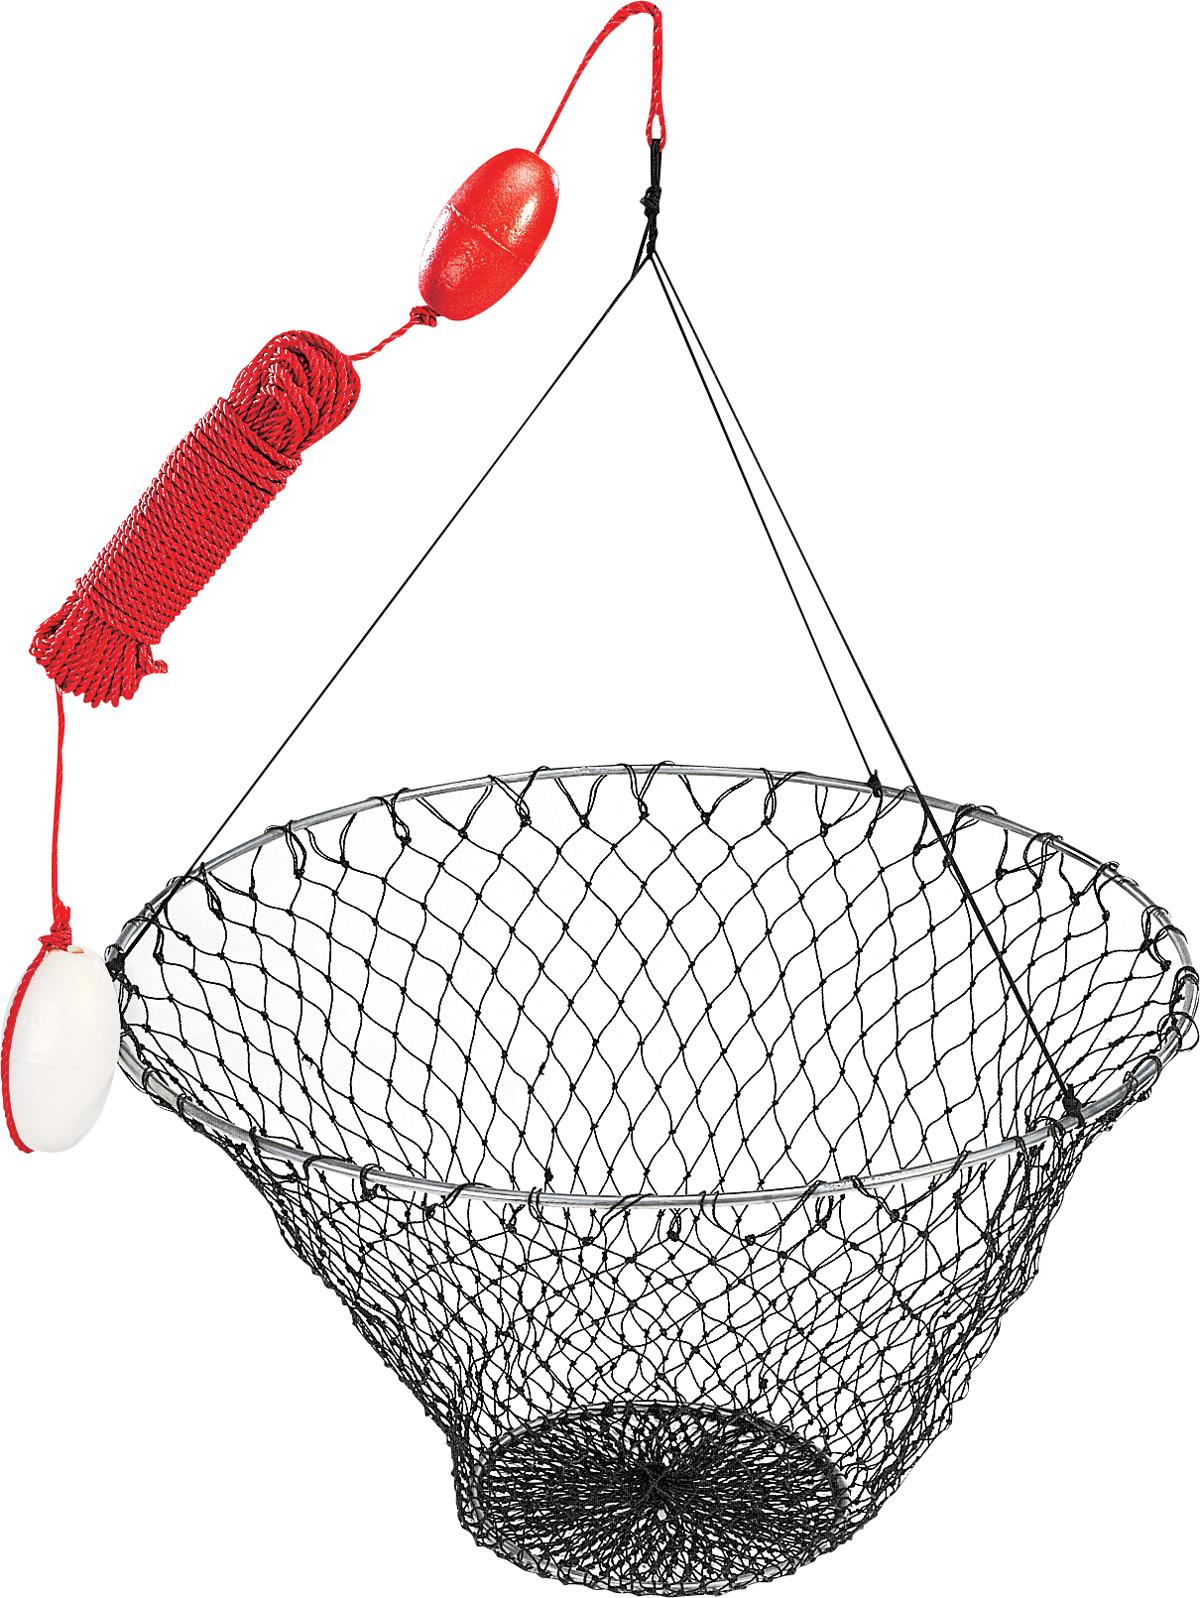 Additional Changes Coming for Hoop Net Crabbing